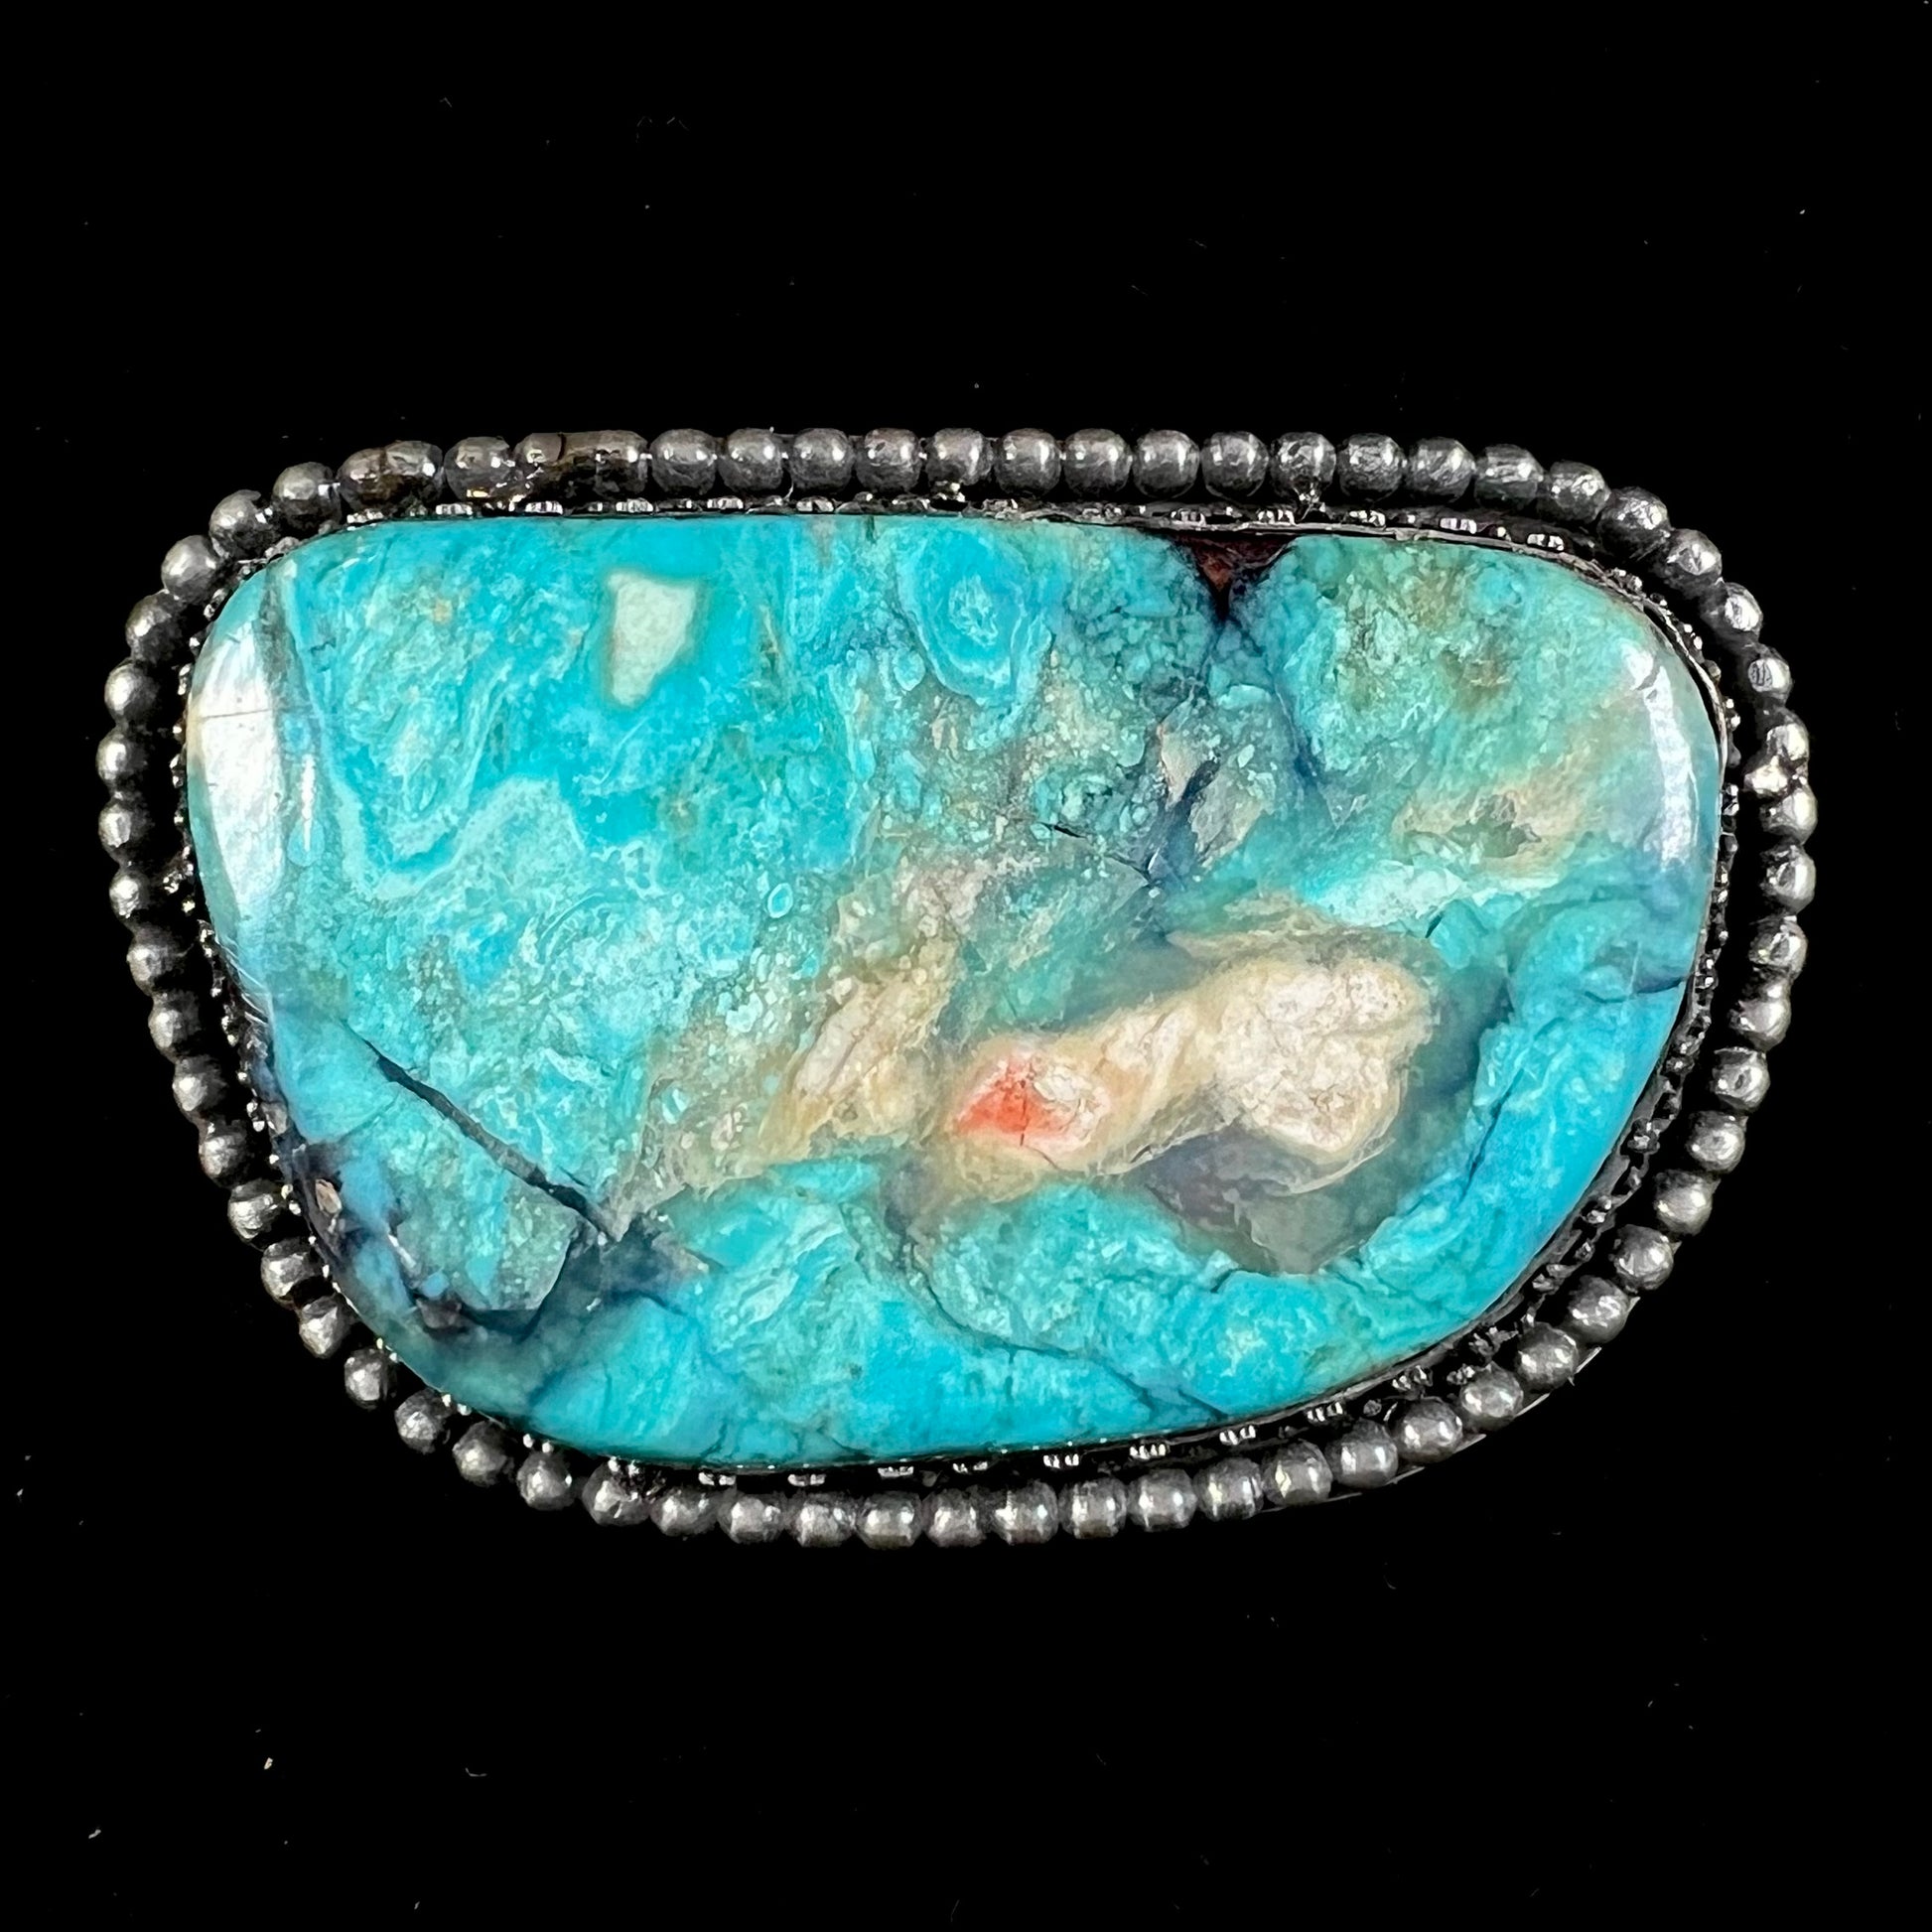 A sterling silver, unisex, Navajo style belt buckle set with a large Valley Blue turquoise stone.